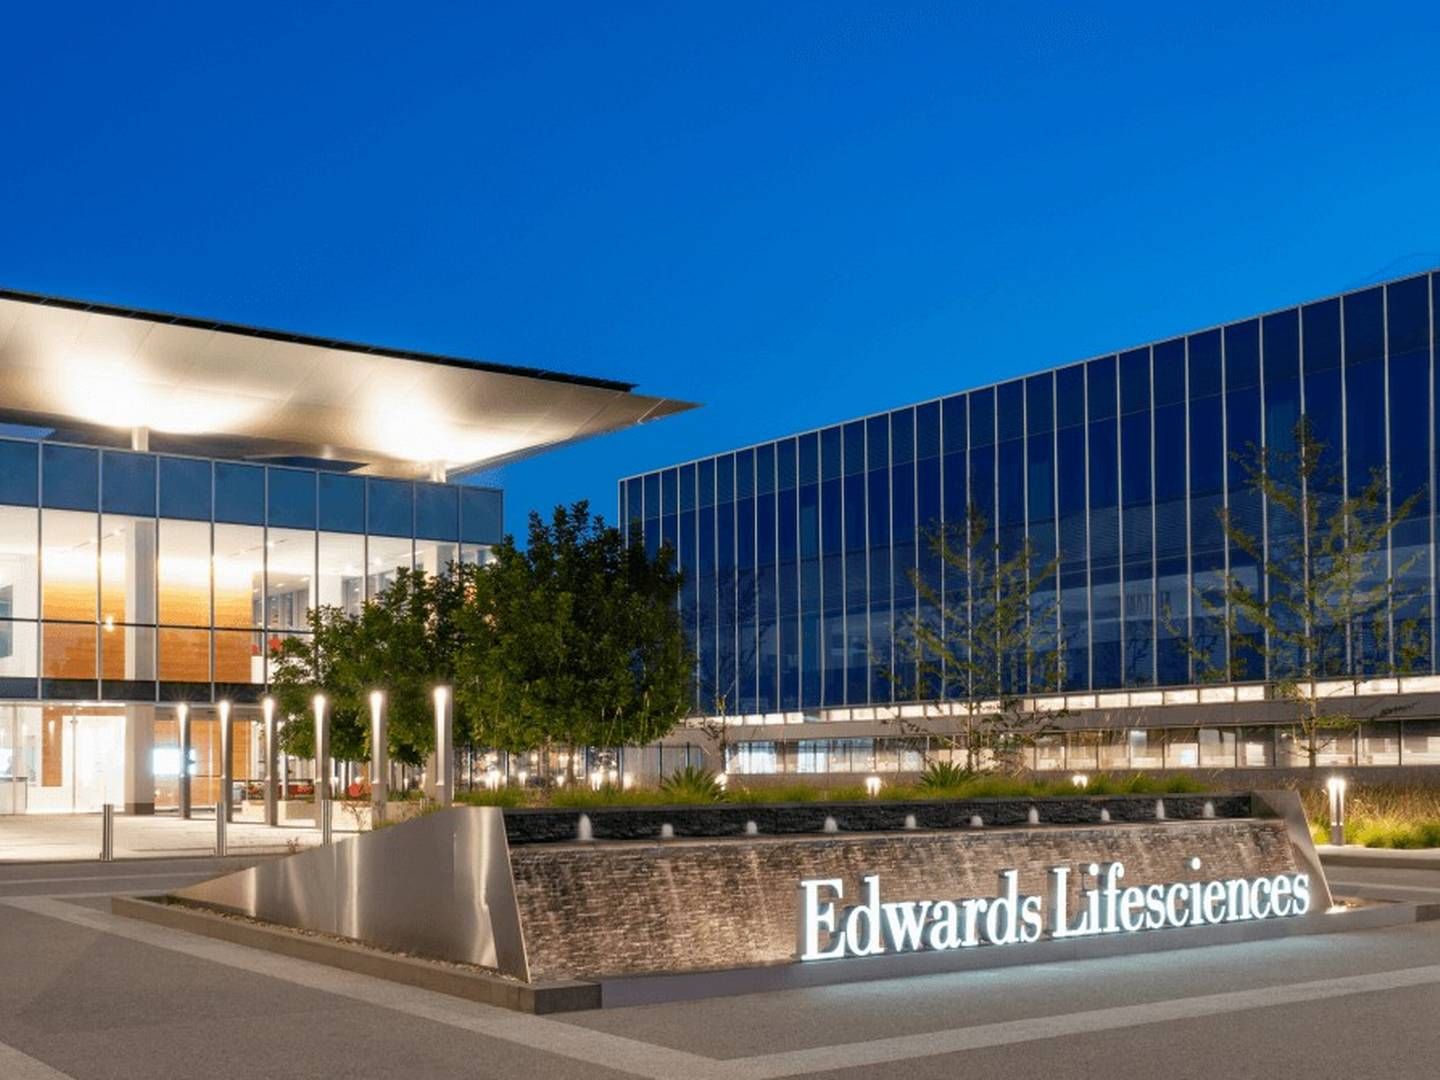 Edward Lifescience specializes in heart disease and surgical monitoring. It is headquartered in Irvine, California. | Photo: Edward Lifesciences